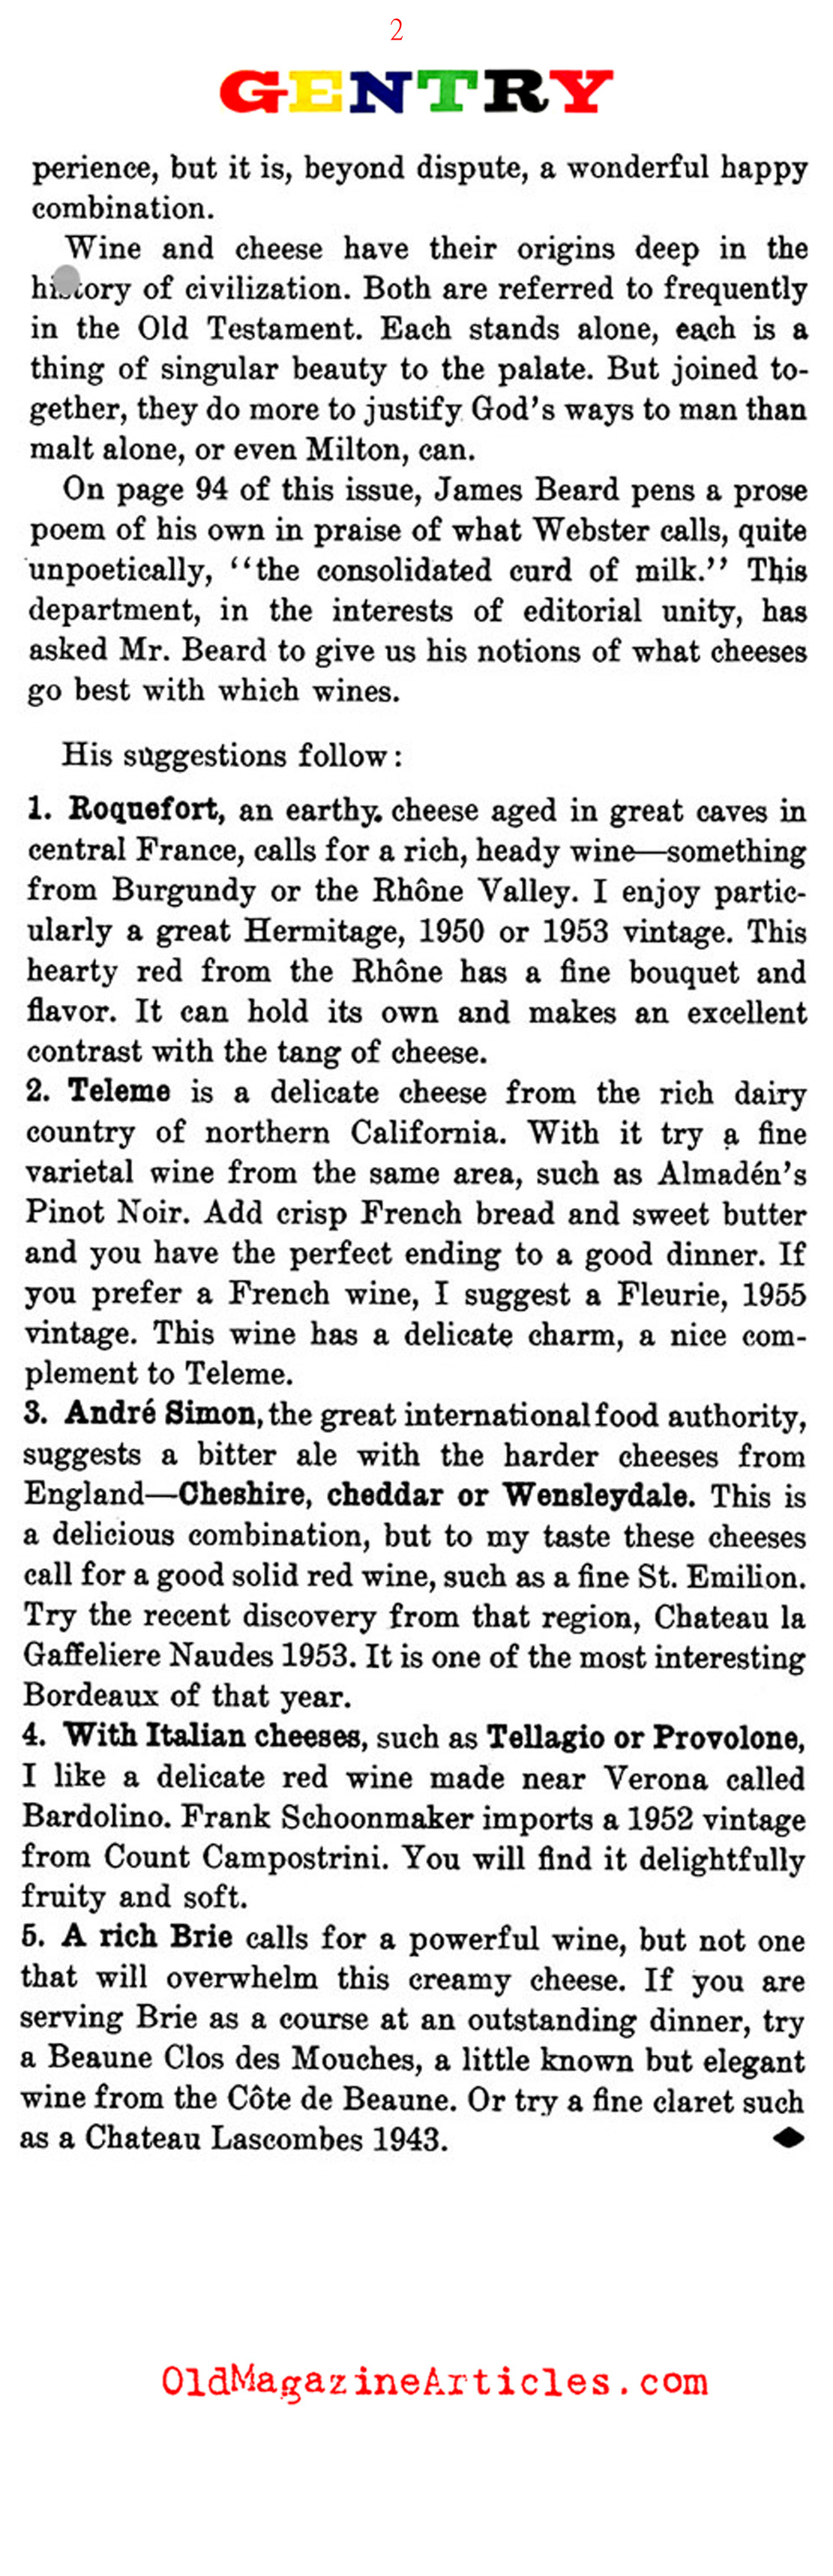 Selecting the Wine and Cheese (Gentry Magazine, 1957)